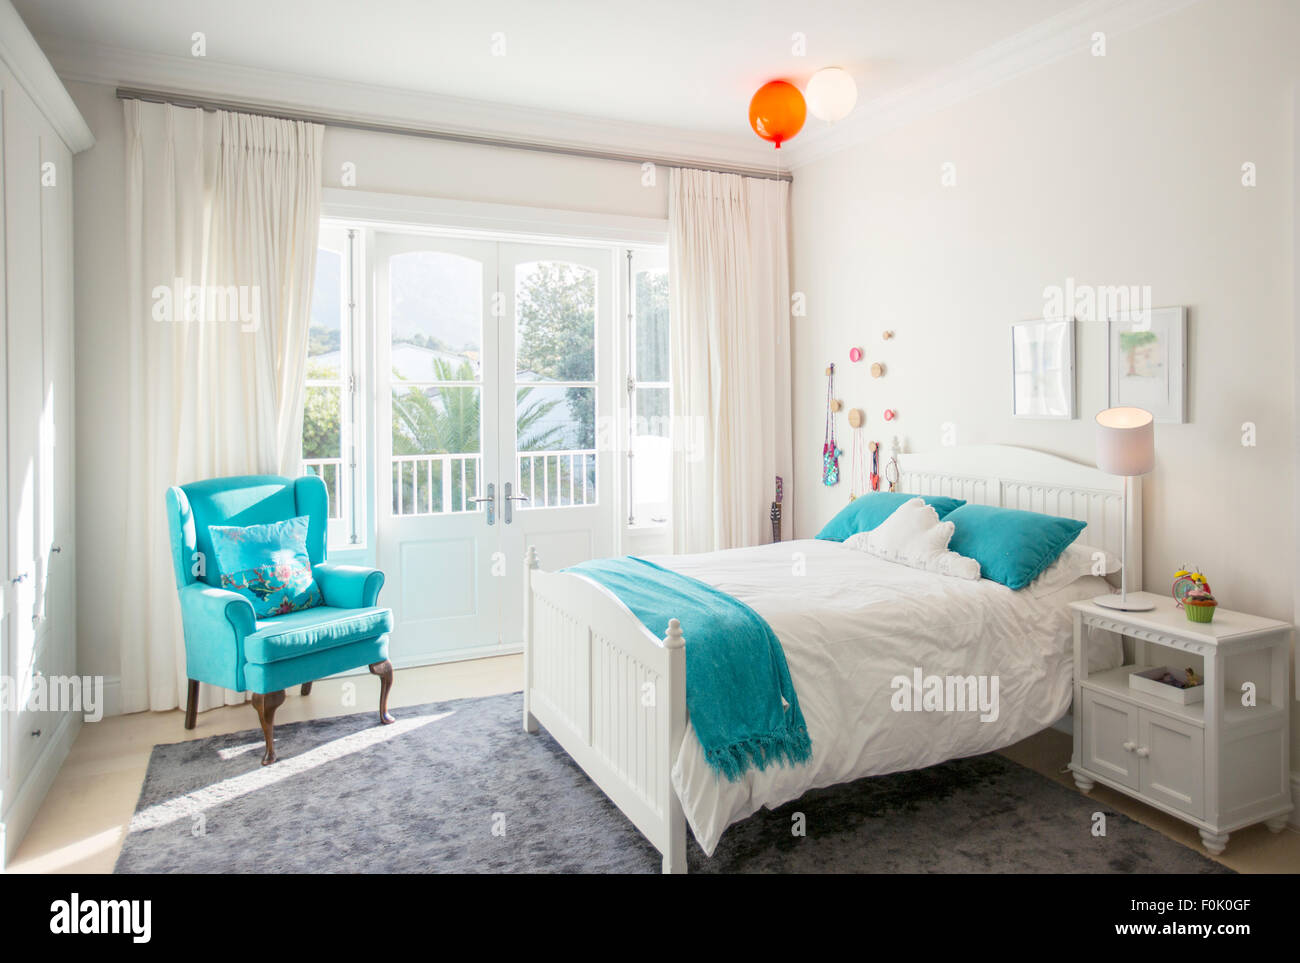 Turquoise color accents in child’s bedroom Stock Photo